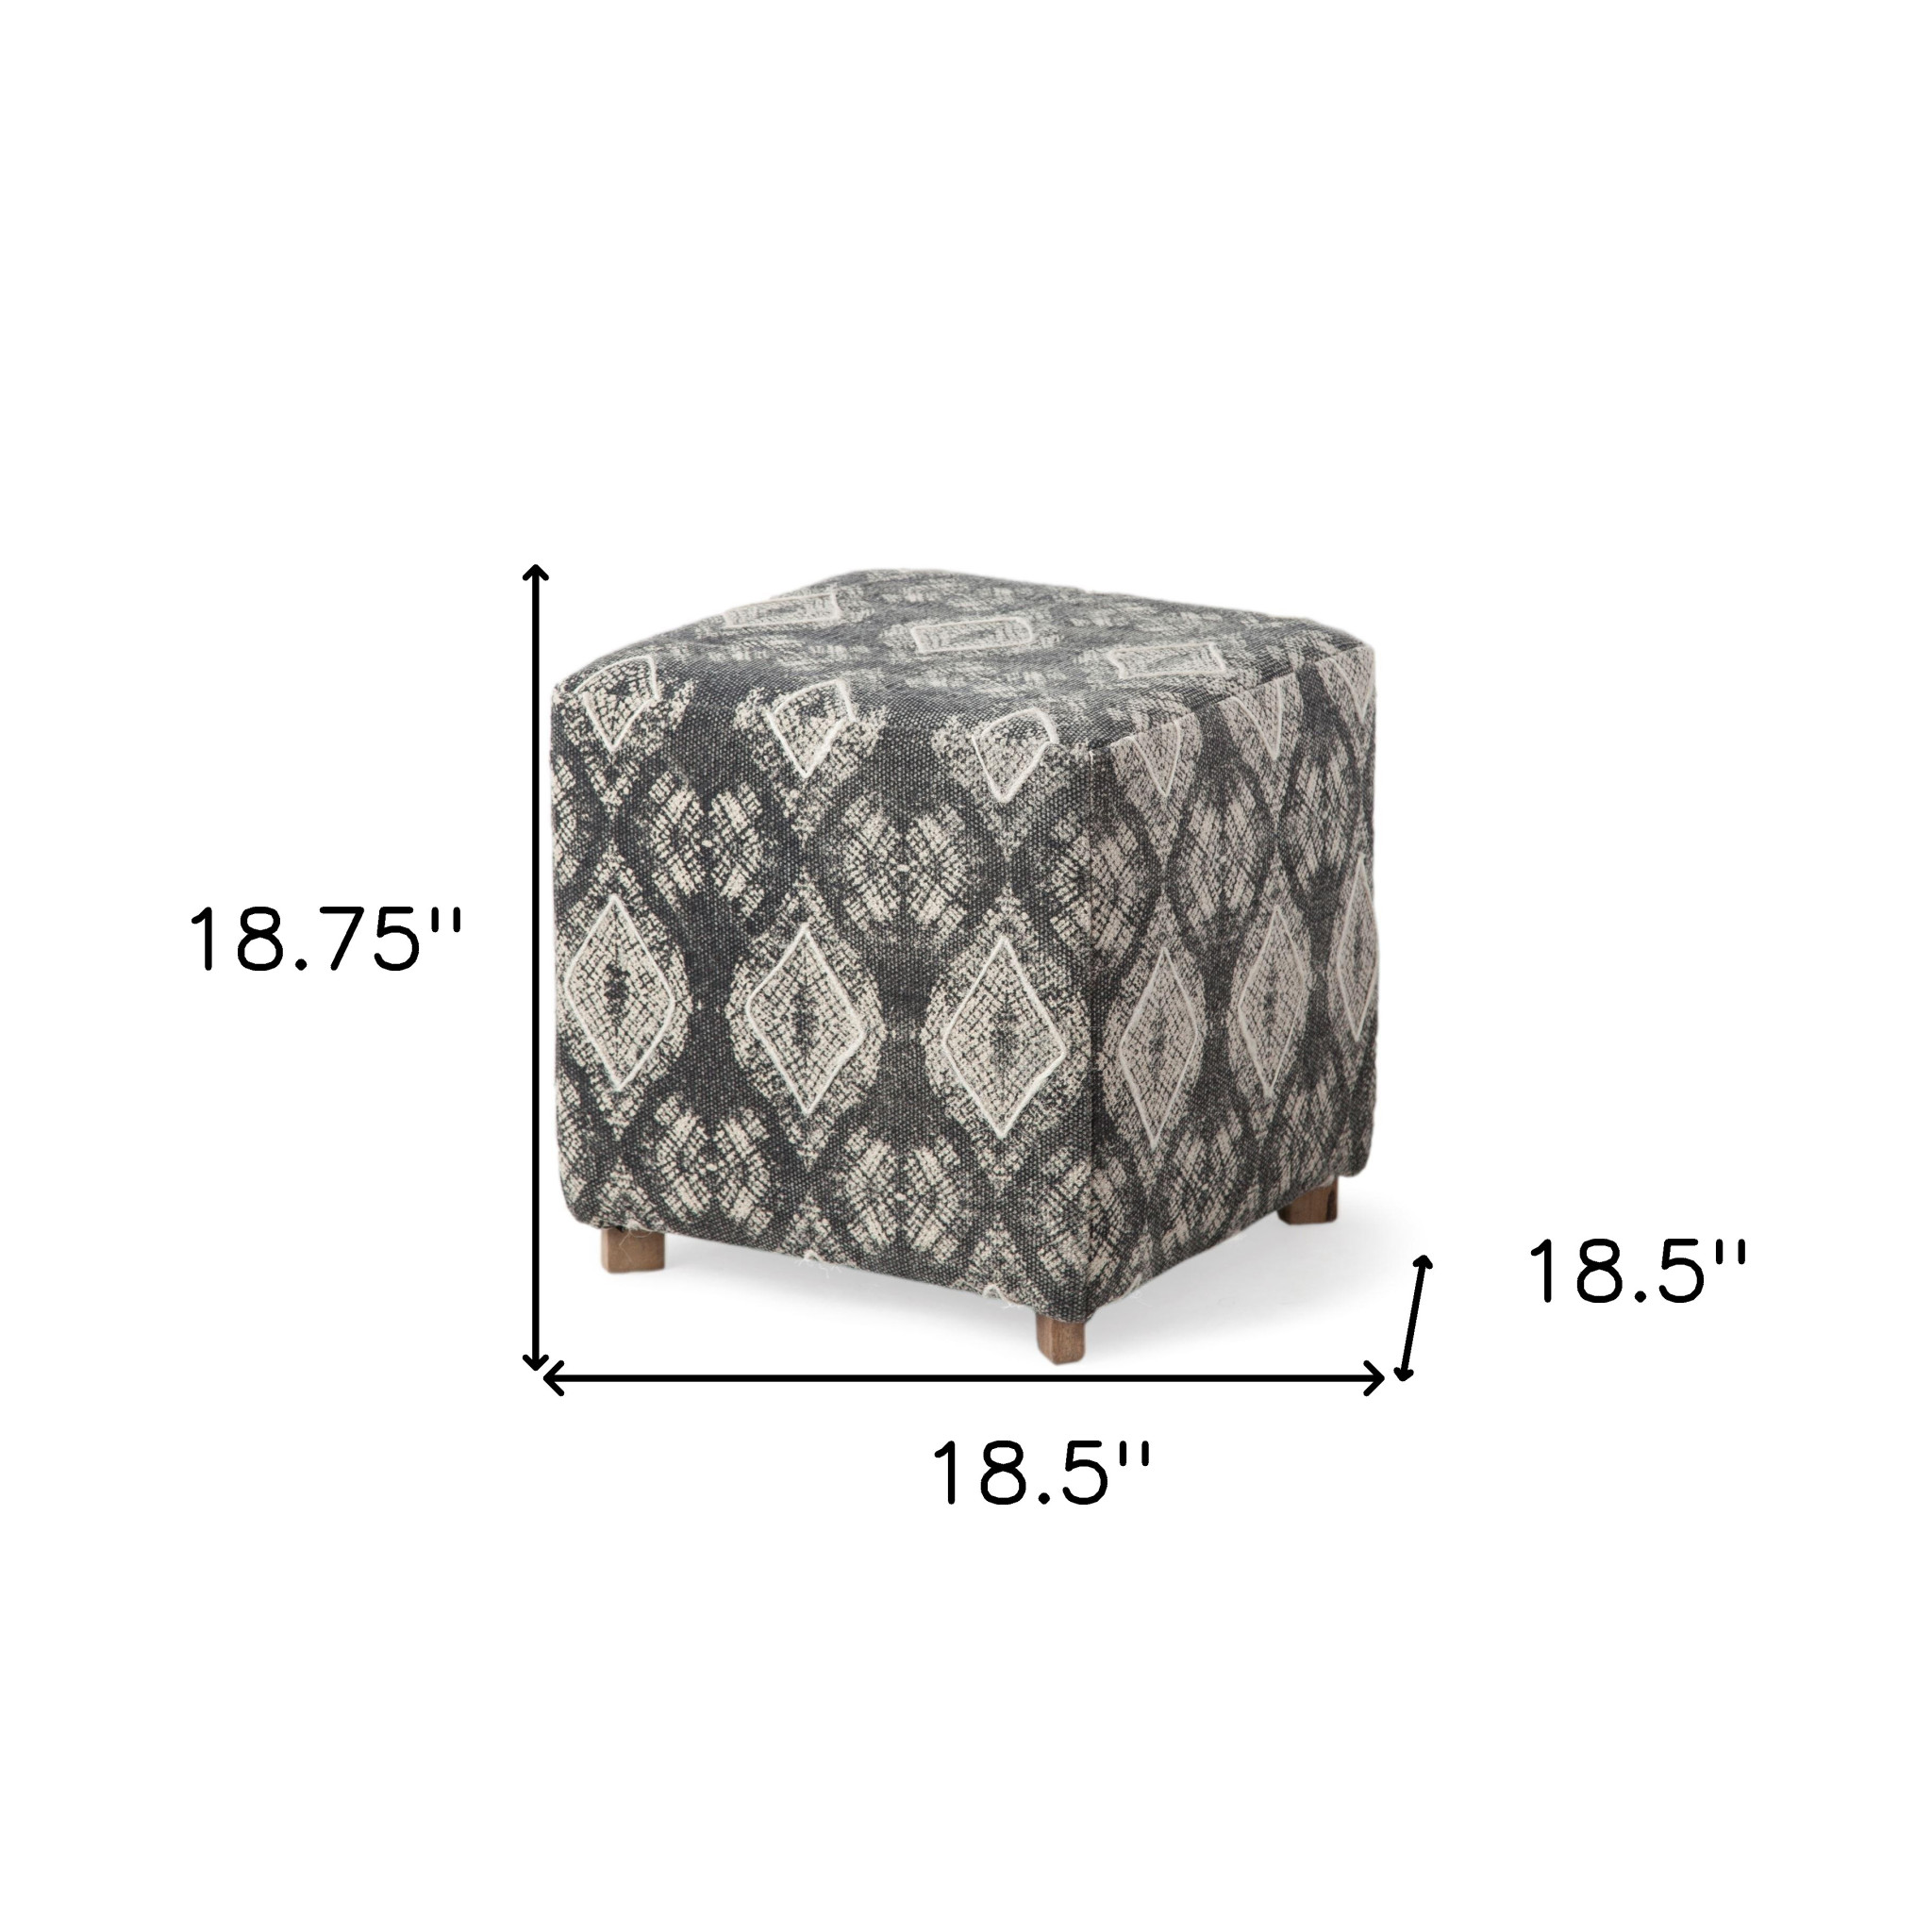 Patterned Fabric Covered Ottoman with Wooden Legs